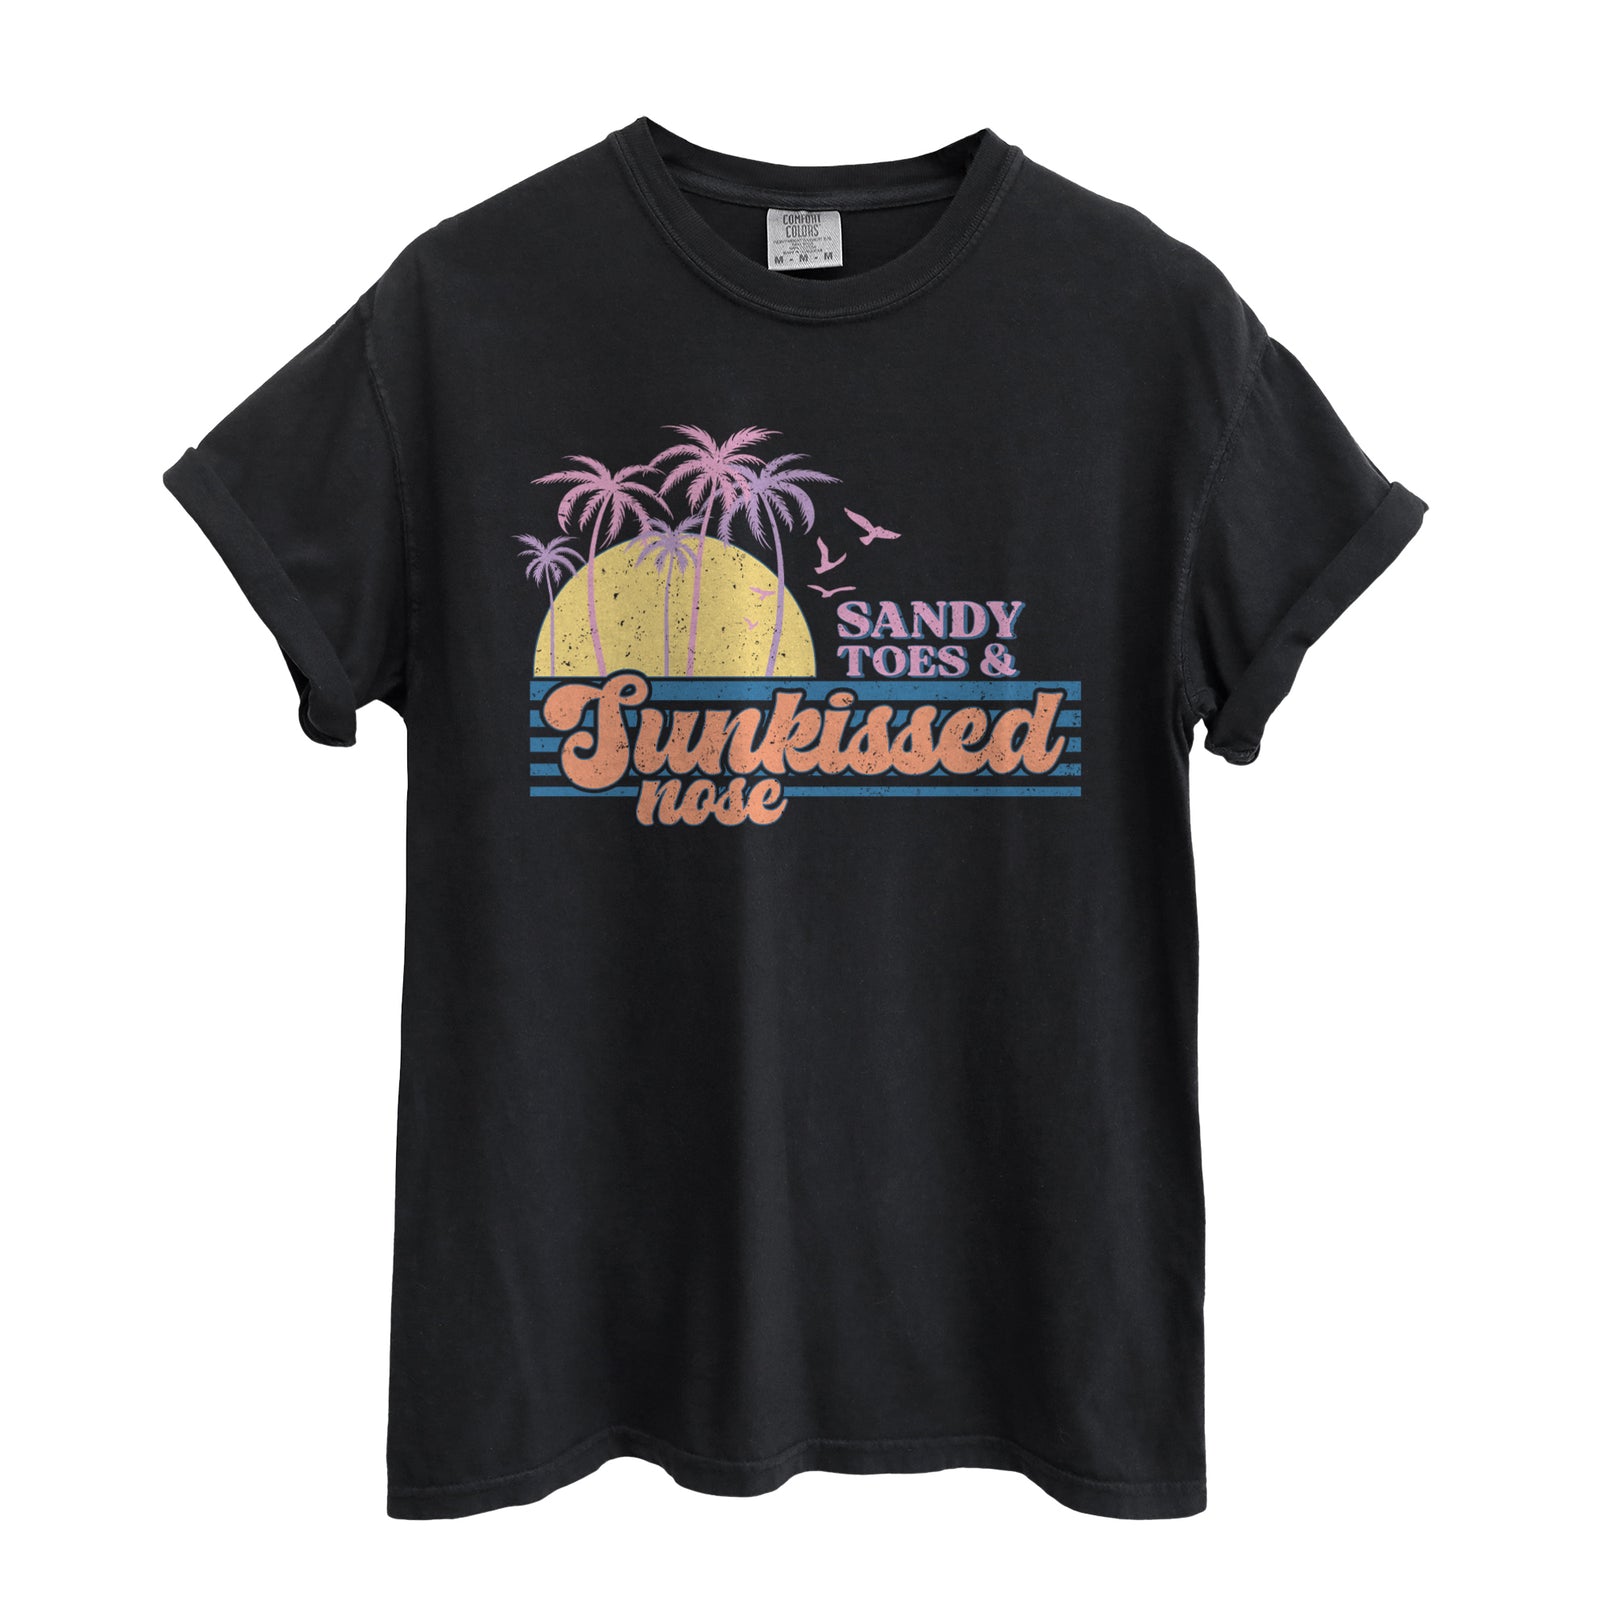 Sandy Toes & Sunkissed Nose Oversized Shirt for Women Garment-Dyed Graphic Tee